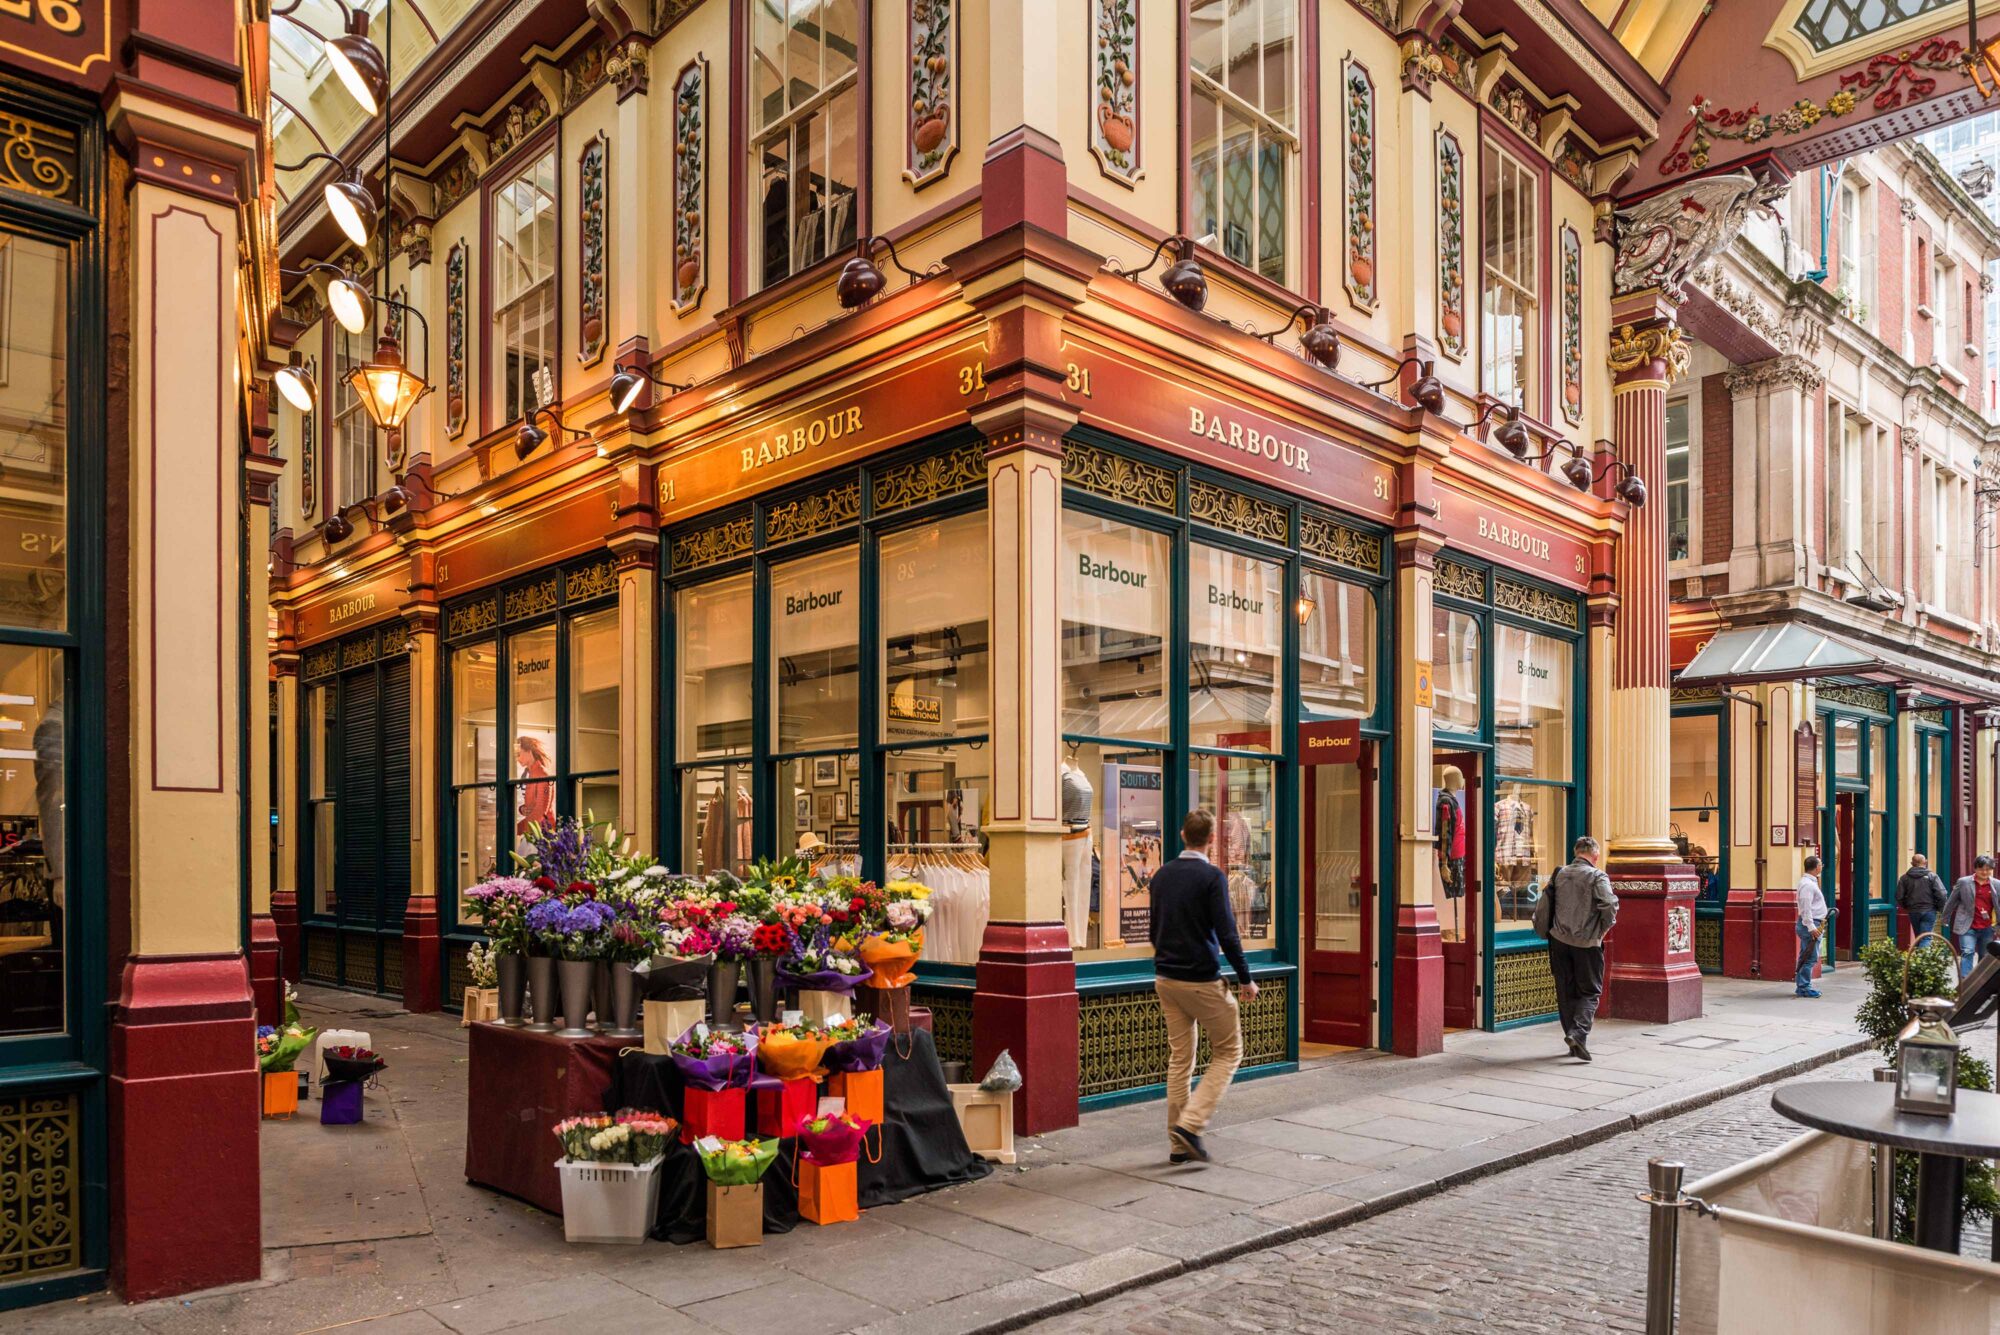 Luxury shopping in the City - Leadenhall market shop - red and yellow walled market - flowers for sale